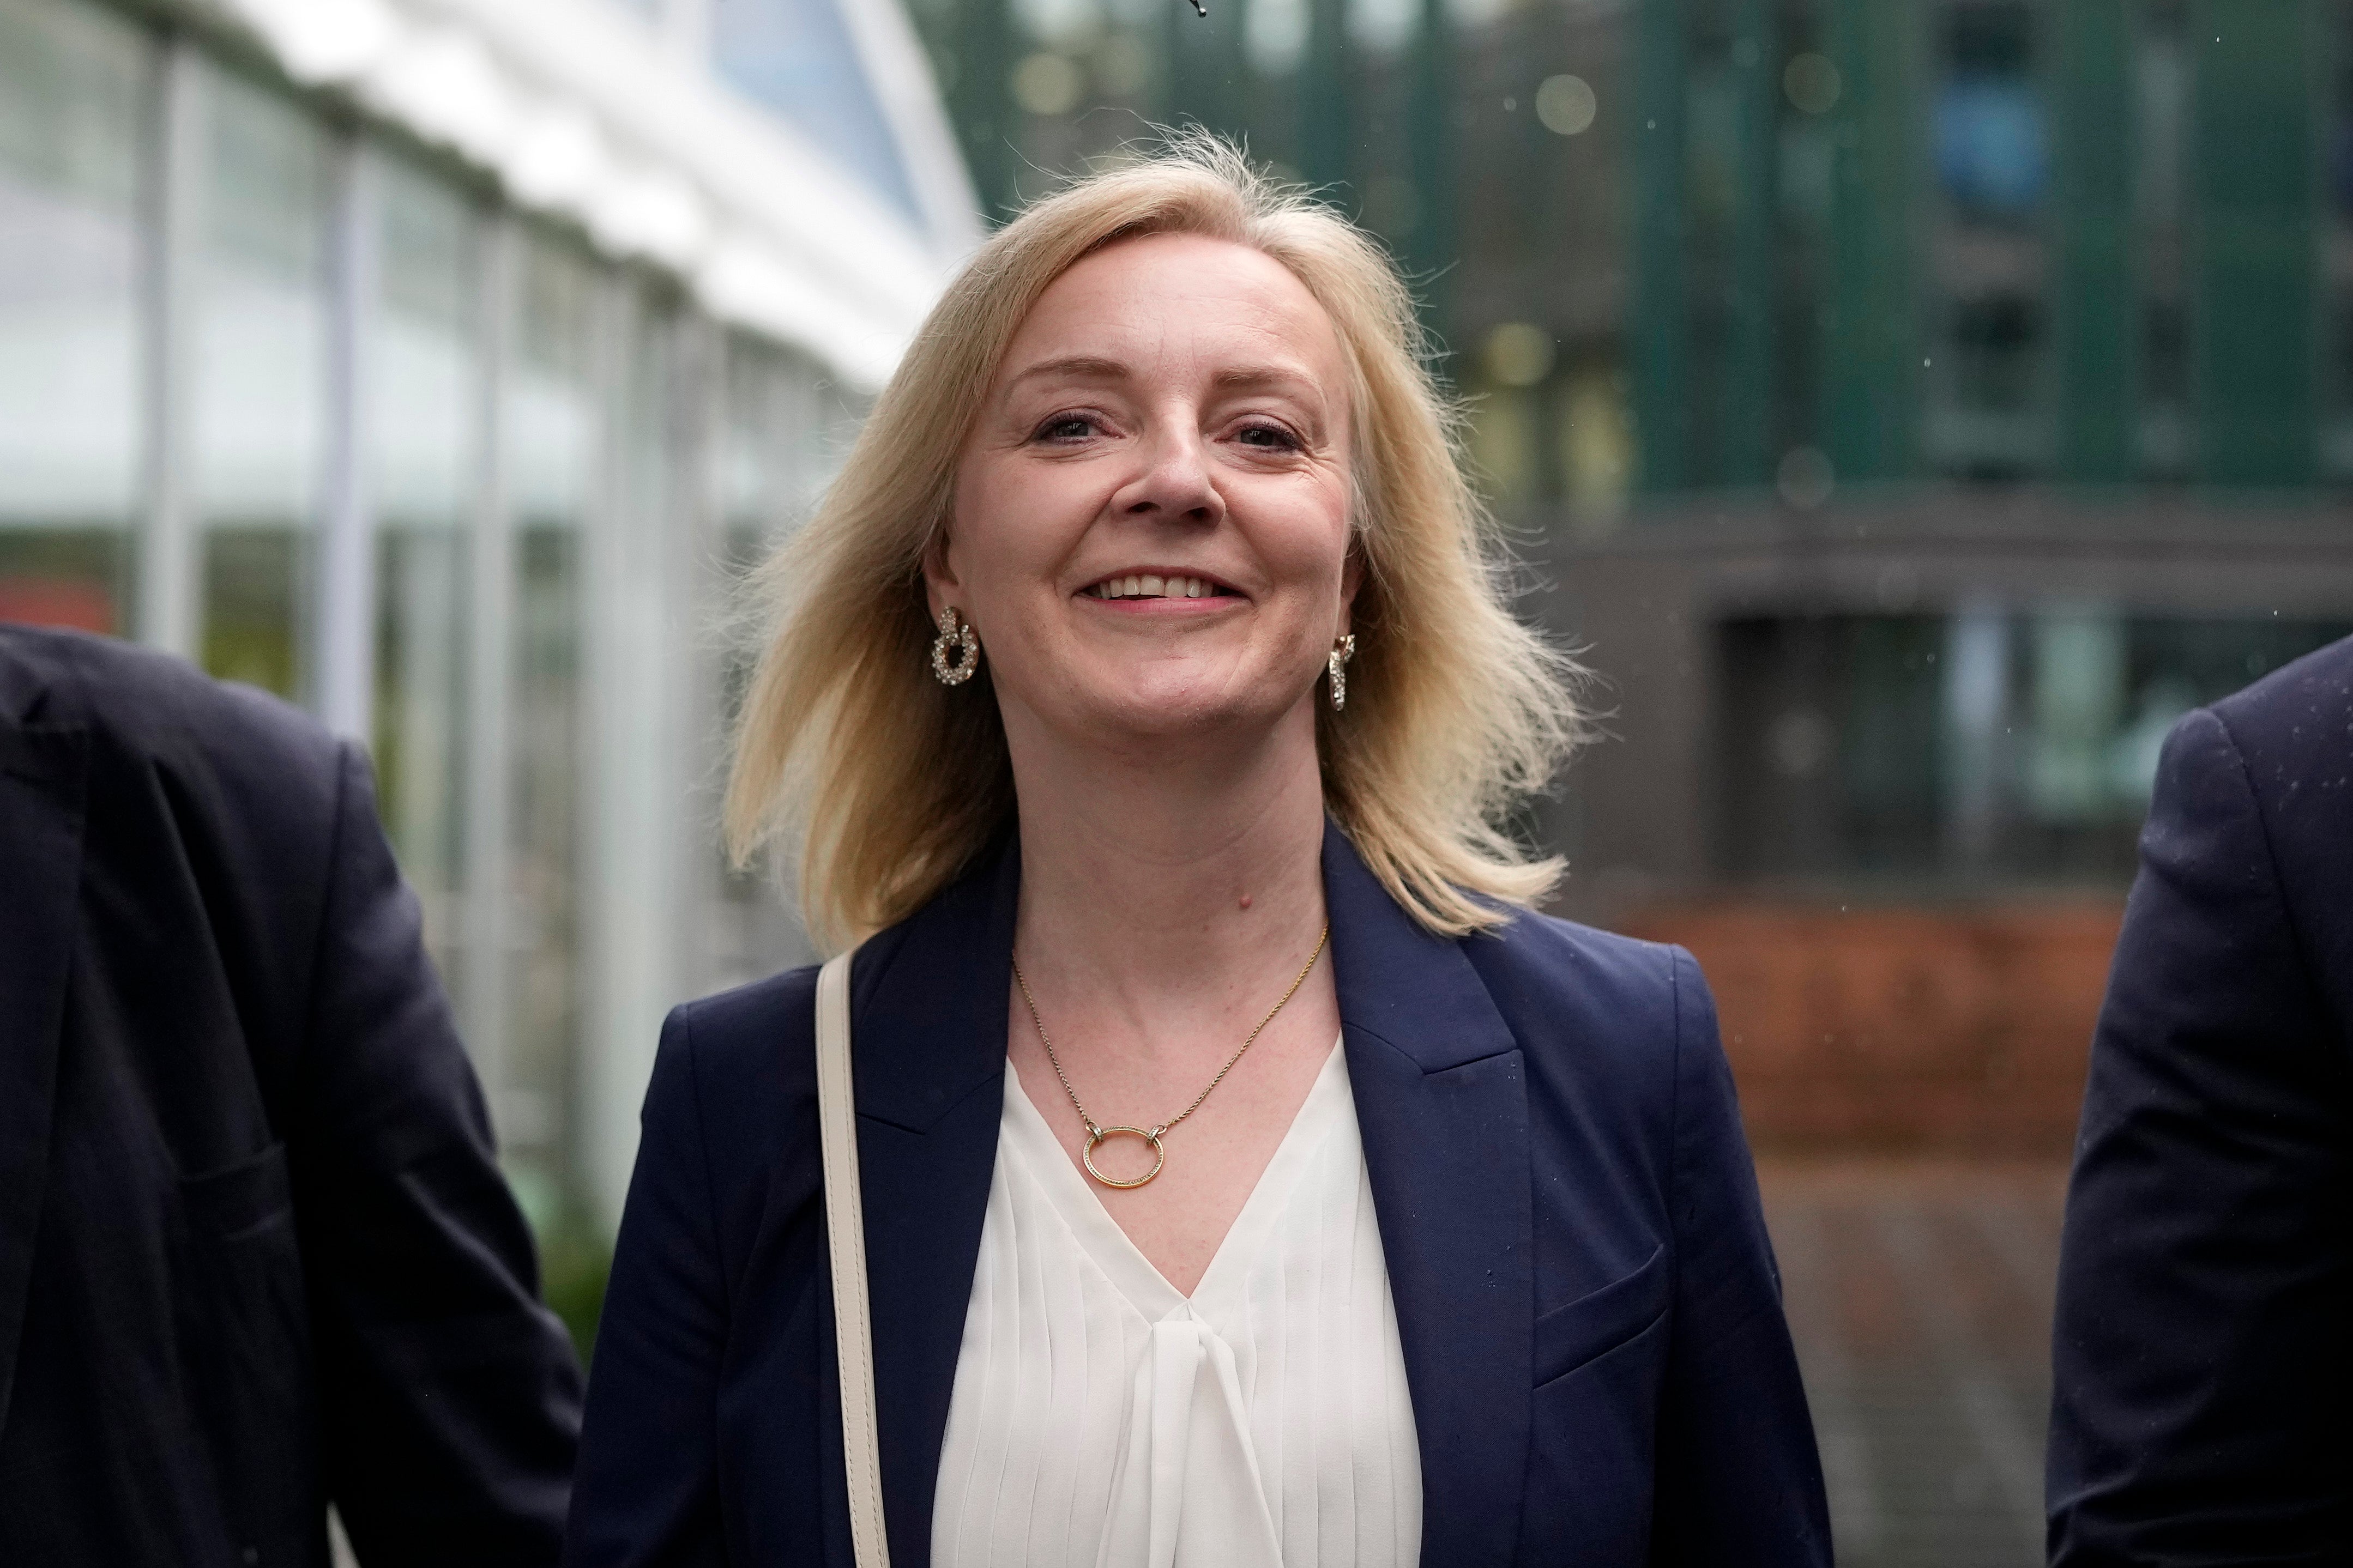 Liz Truss has been unapologetic about economic chaos during her time at No 10